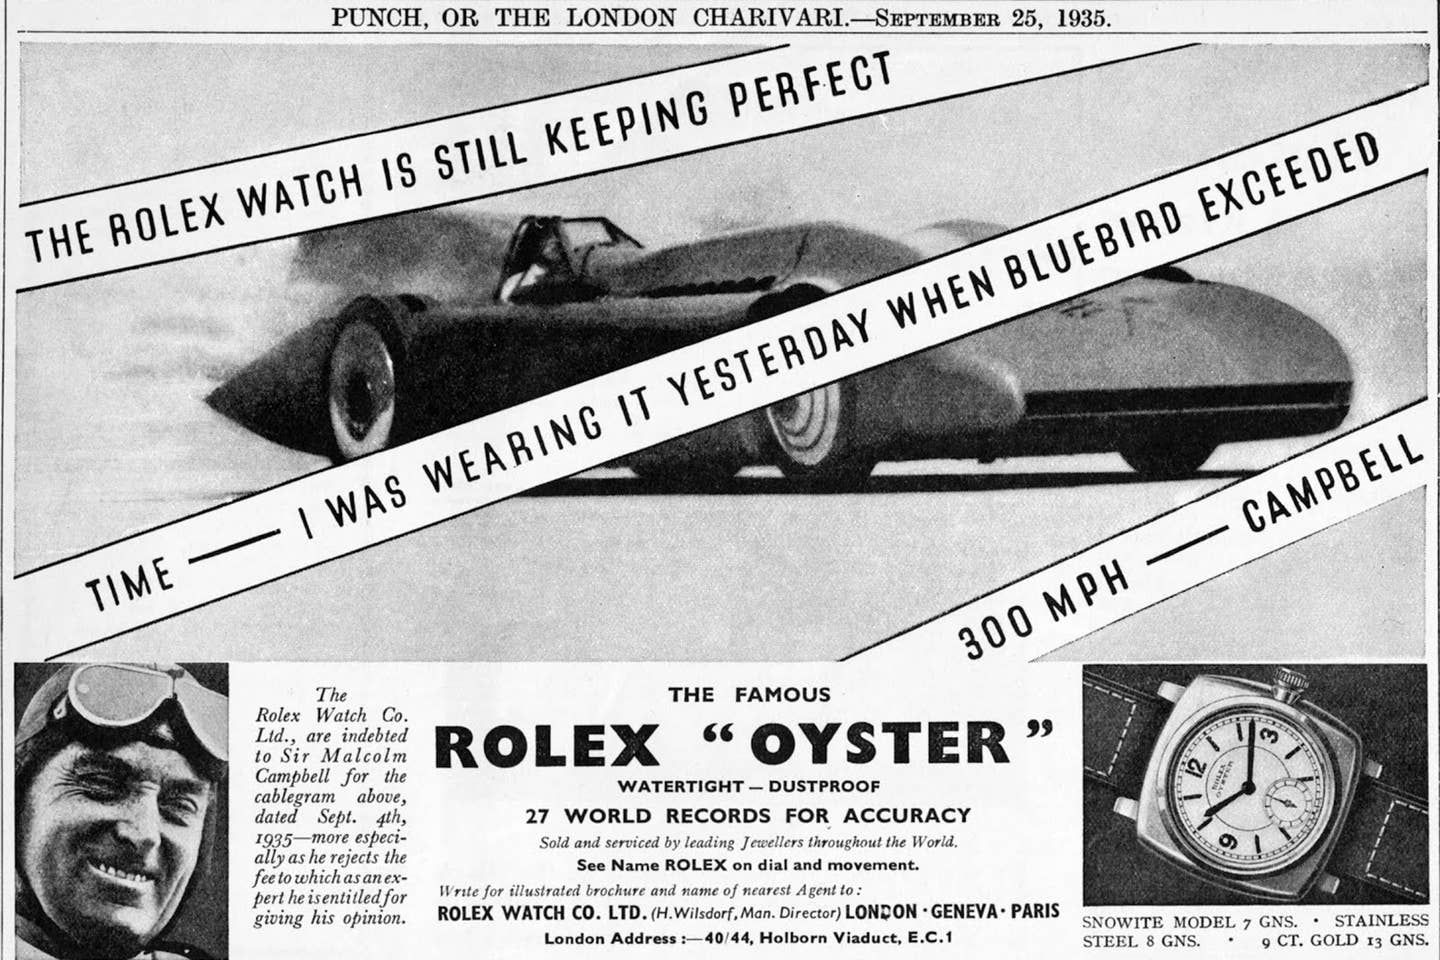 message-editor%2F1572910427627-malcolm-campbell-300-mph-speed-record-rolex-1935.jpg